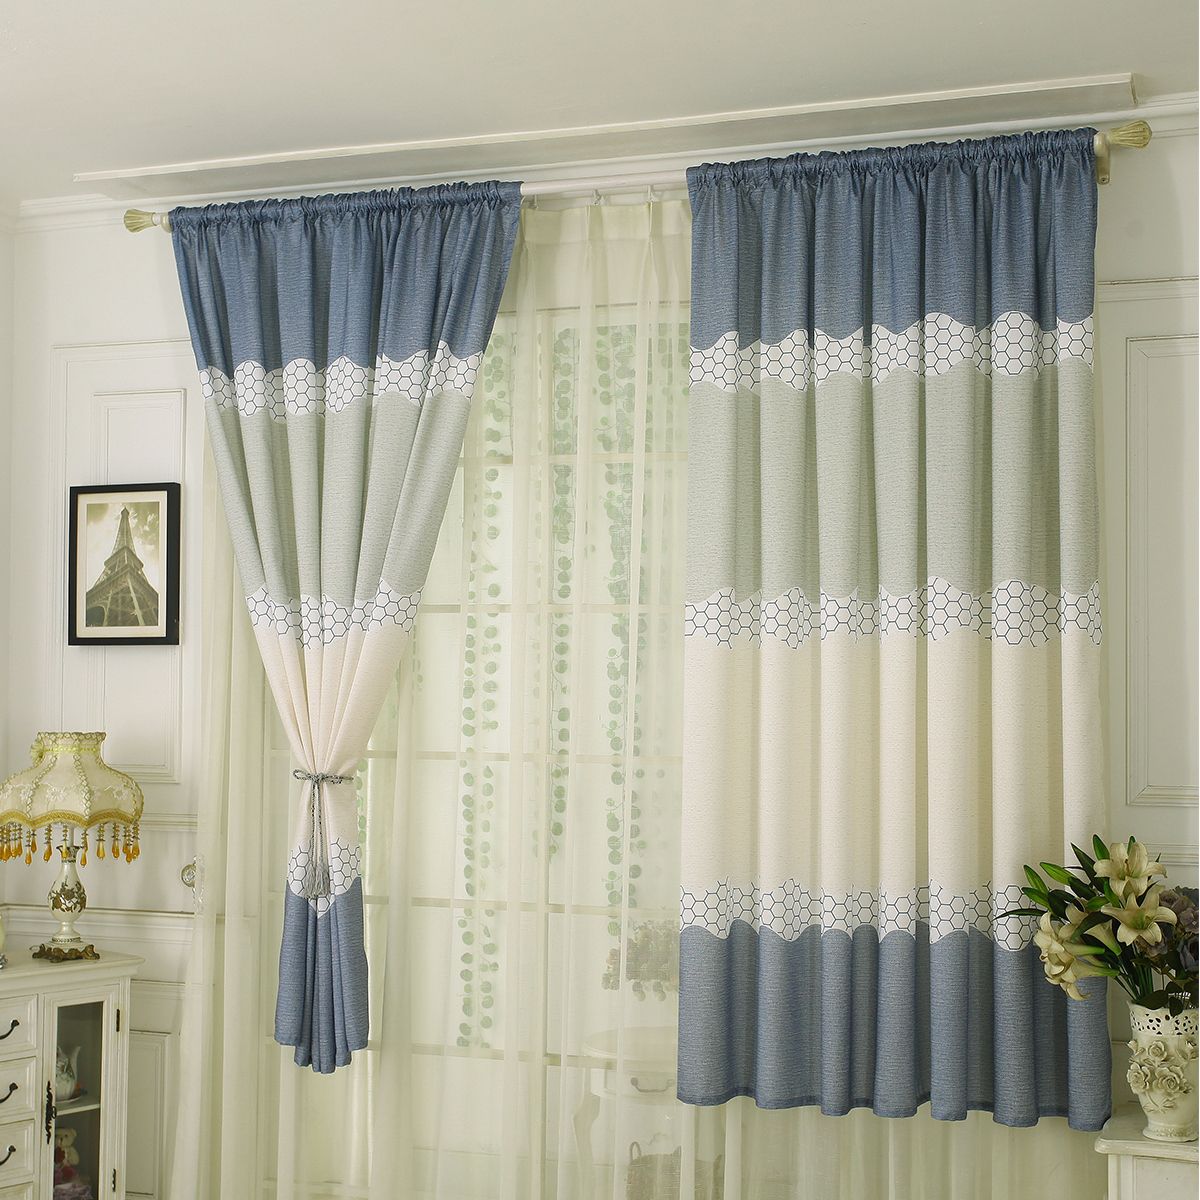 Details About Thermal Pencil Pleat Blackout Window Curtain Panel Rod Pocket  Net Slot Top Tape With Willow Rod Pocket Window Curtain Panels (View 26 of 30)